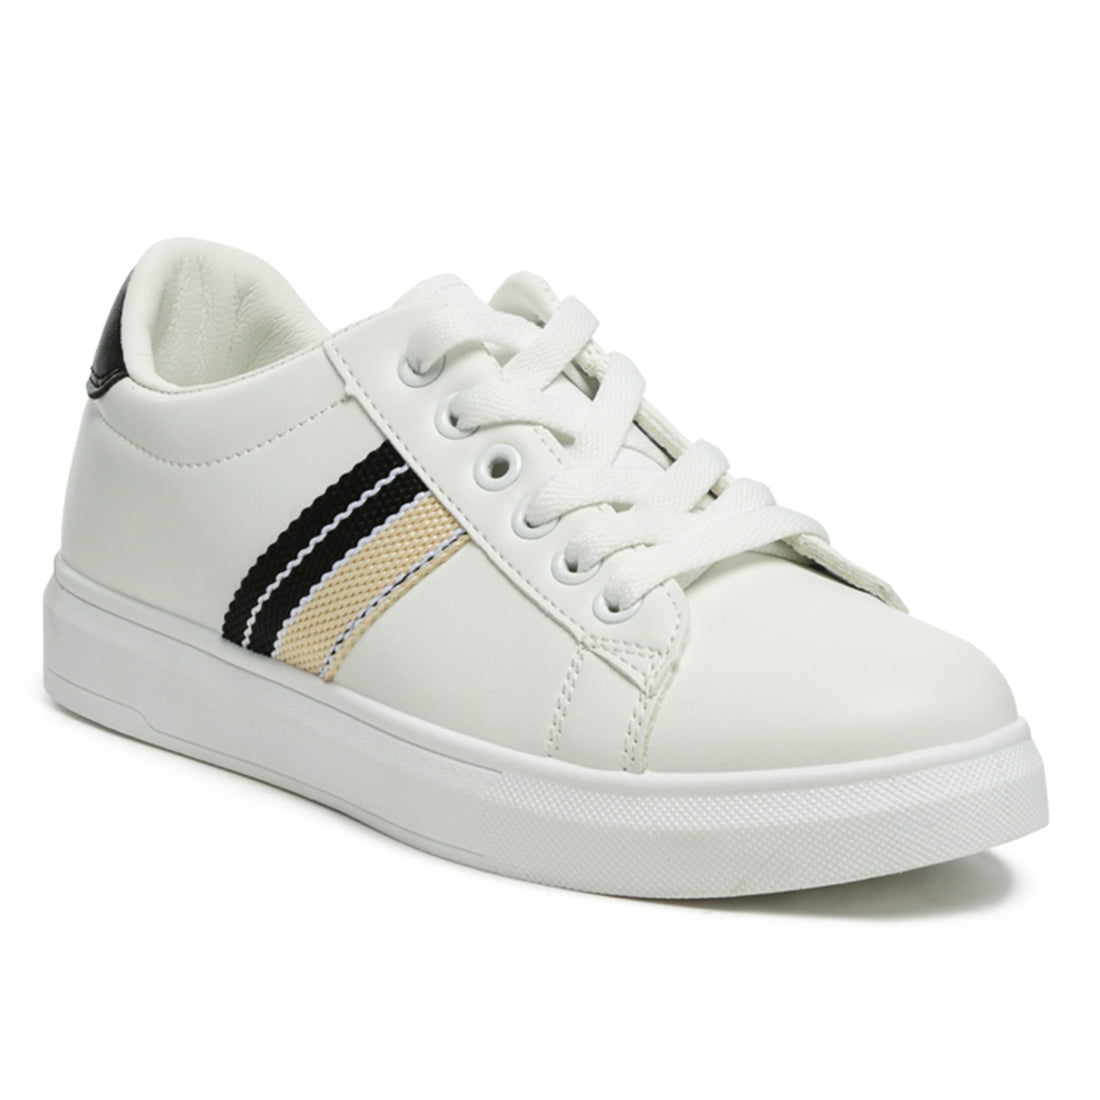 Evening Stroll Casual Active Sneaker in Black Stripes - Black